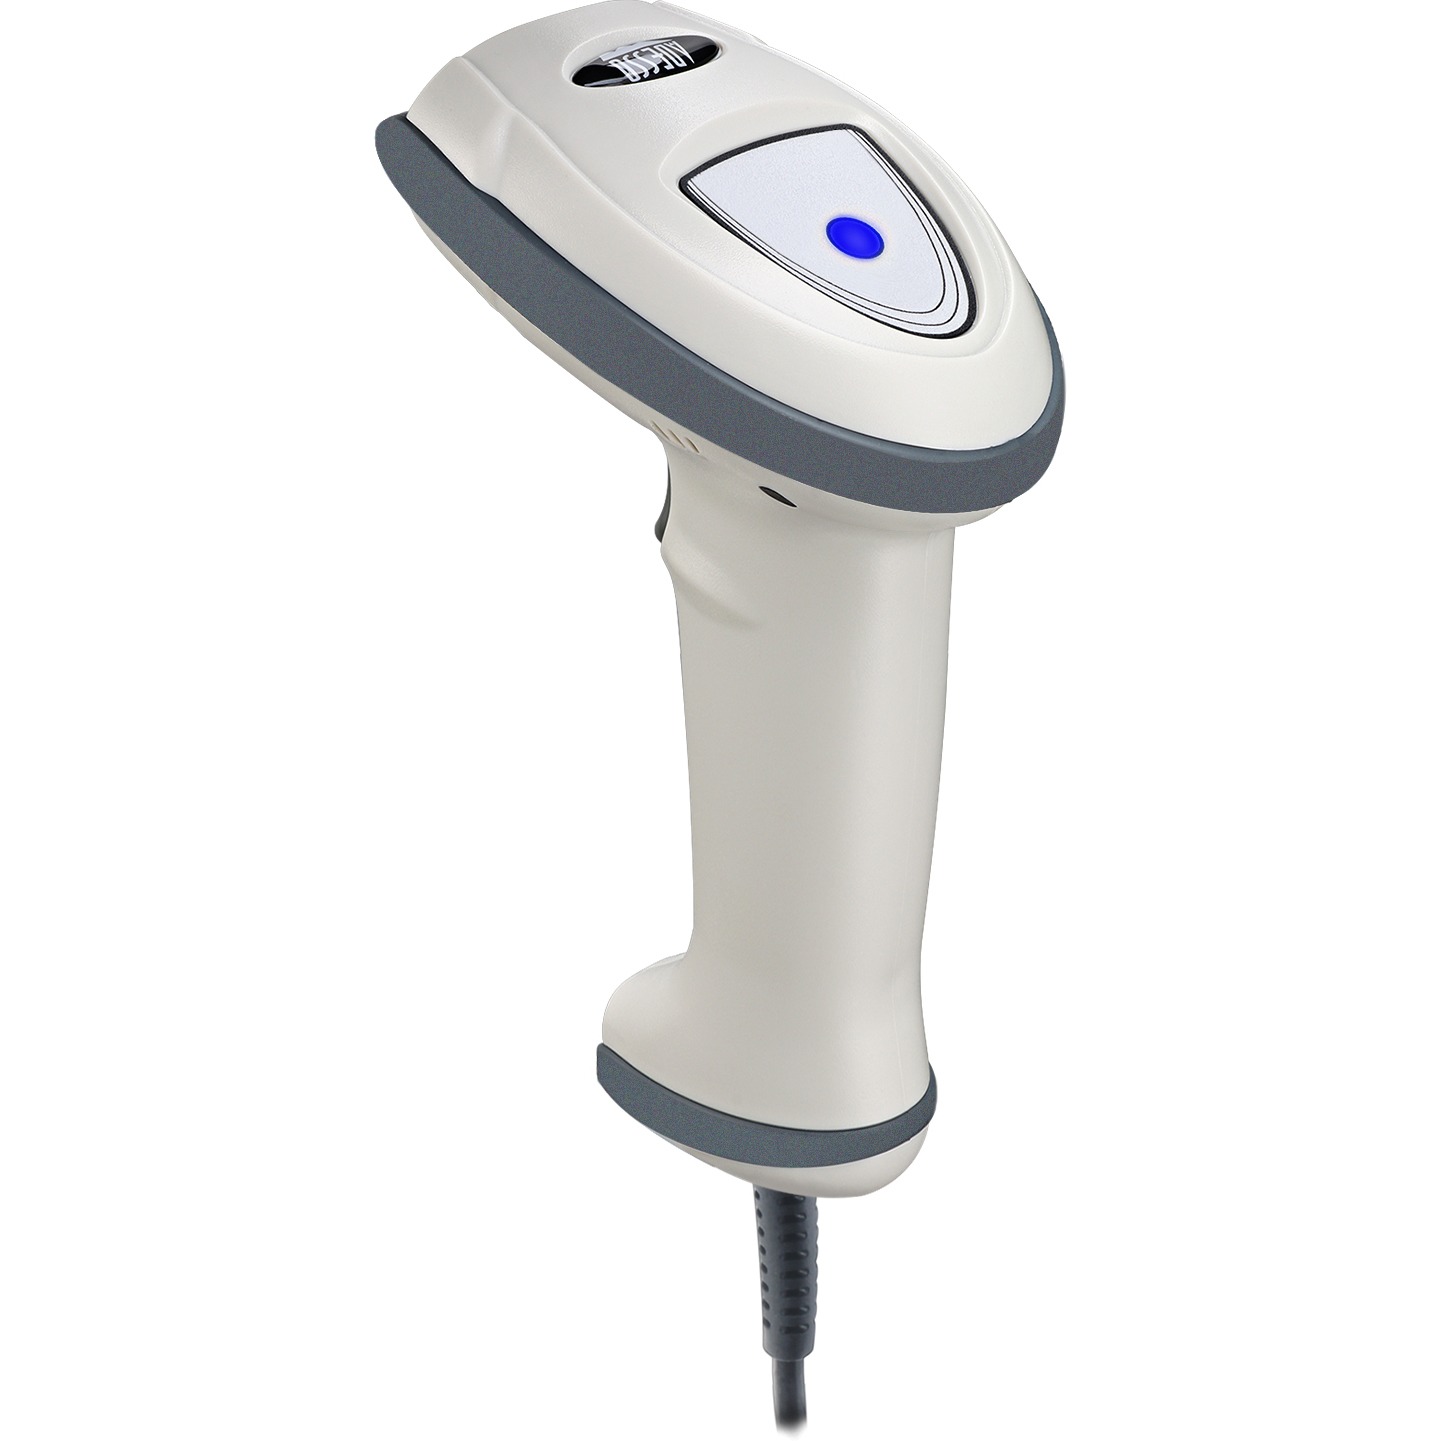 Adesso NuScan 7600TU-W 2D Antimicrobial Handheld Barcode Scanner - White - image 3 of 5